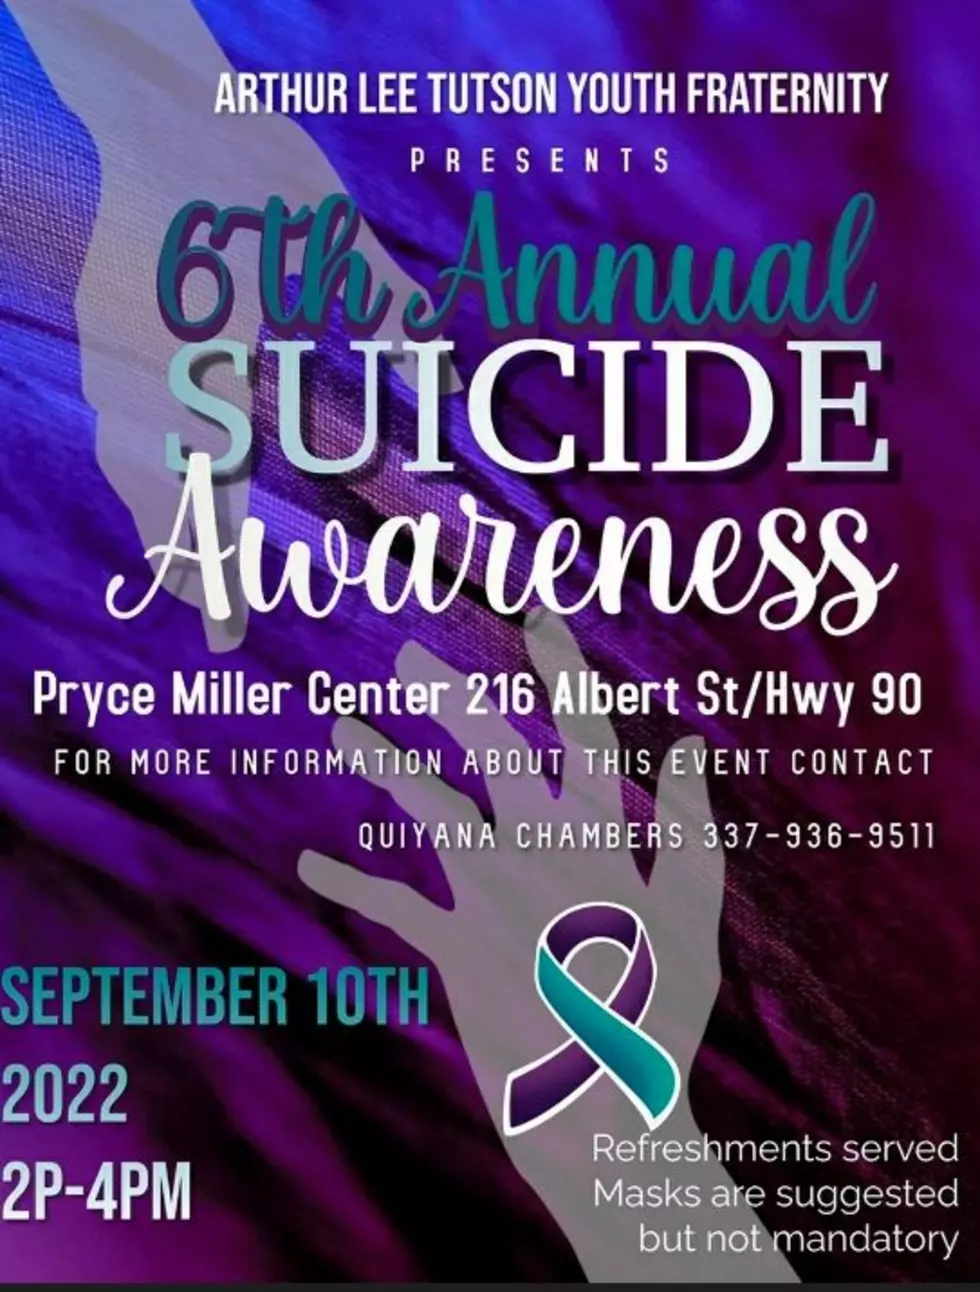 Lake Charles Youth Group Hosting Annual Suicide Prevention Event